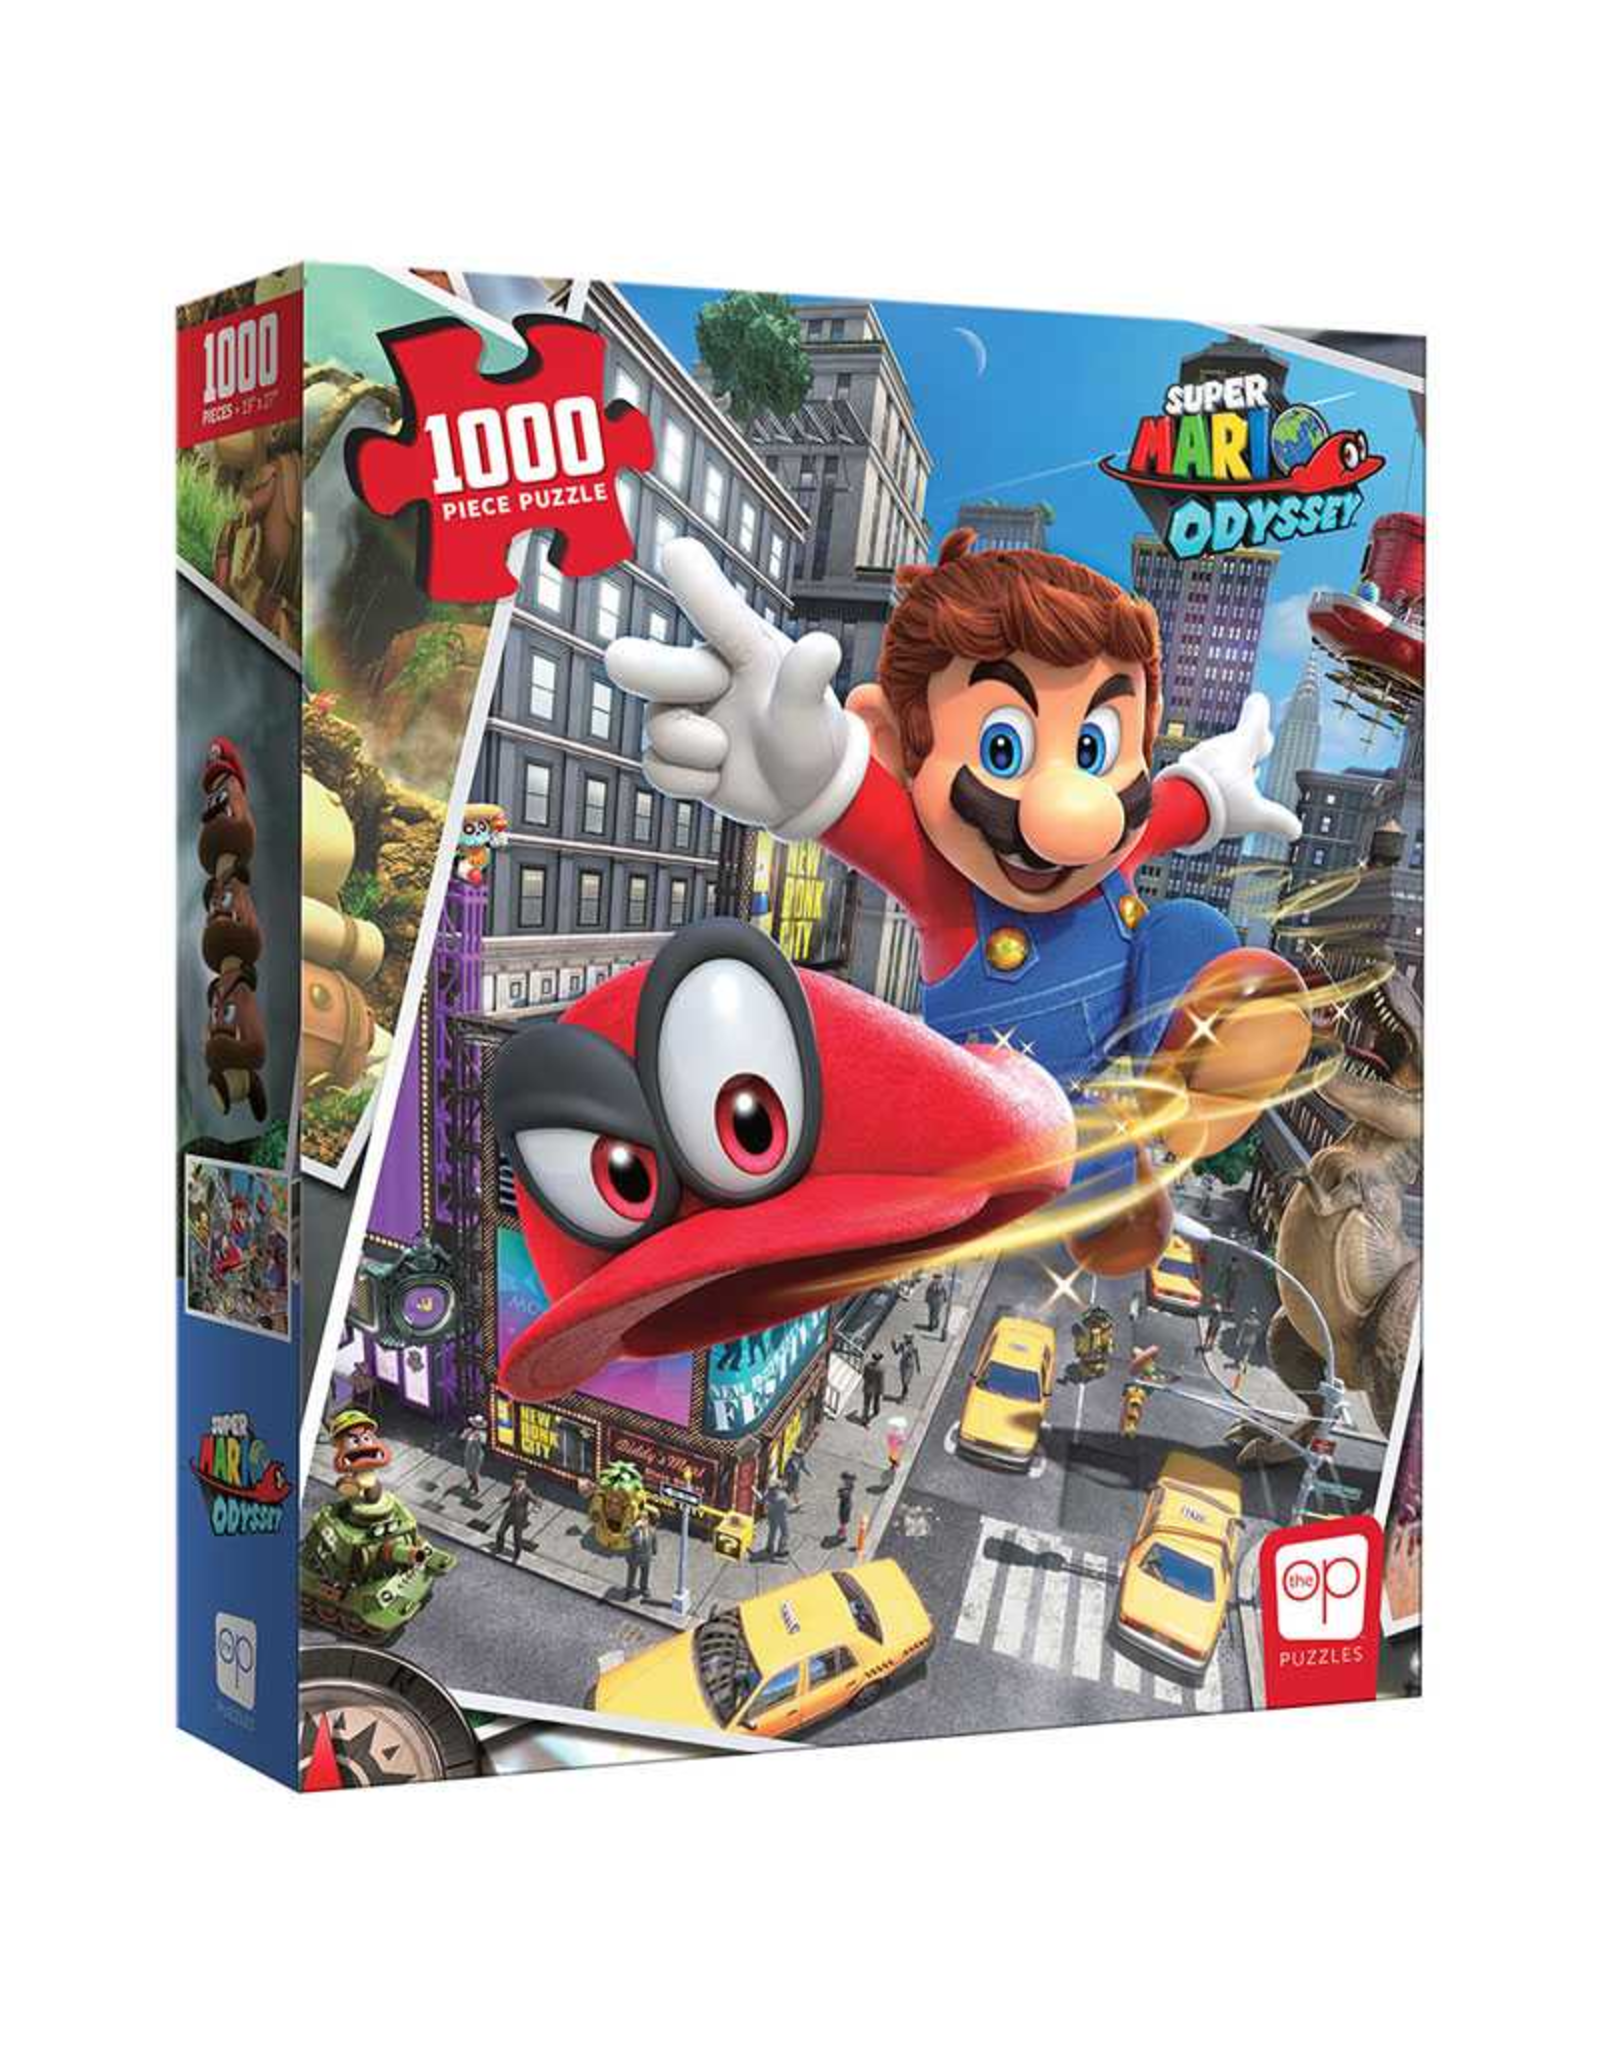 USAopoly Super Mario Odyssey Snapshots Puzzle 1000 PCS